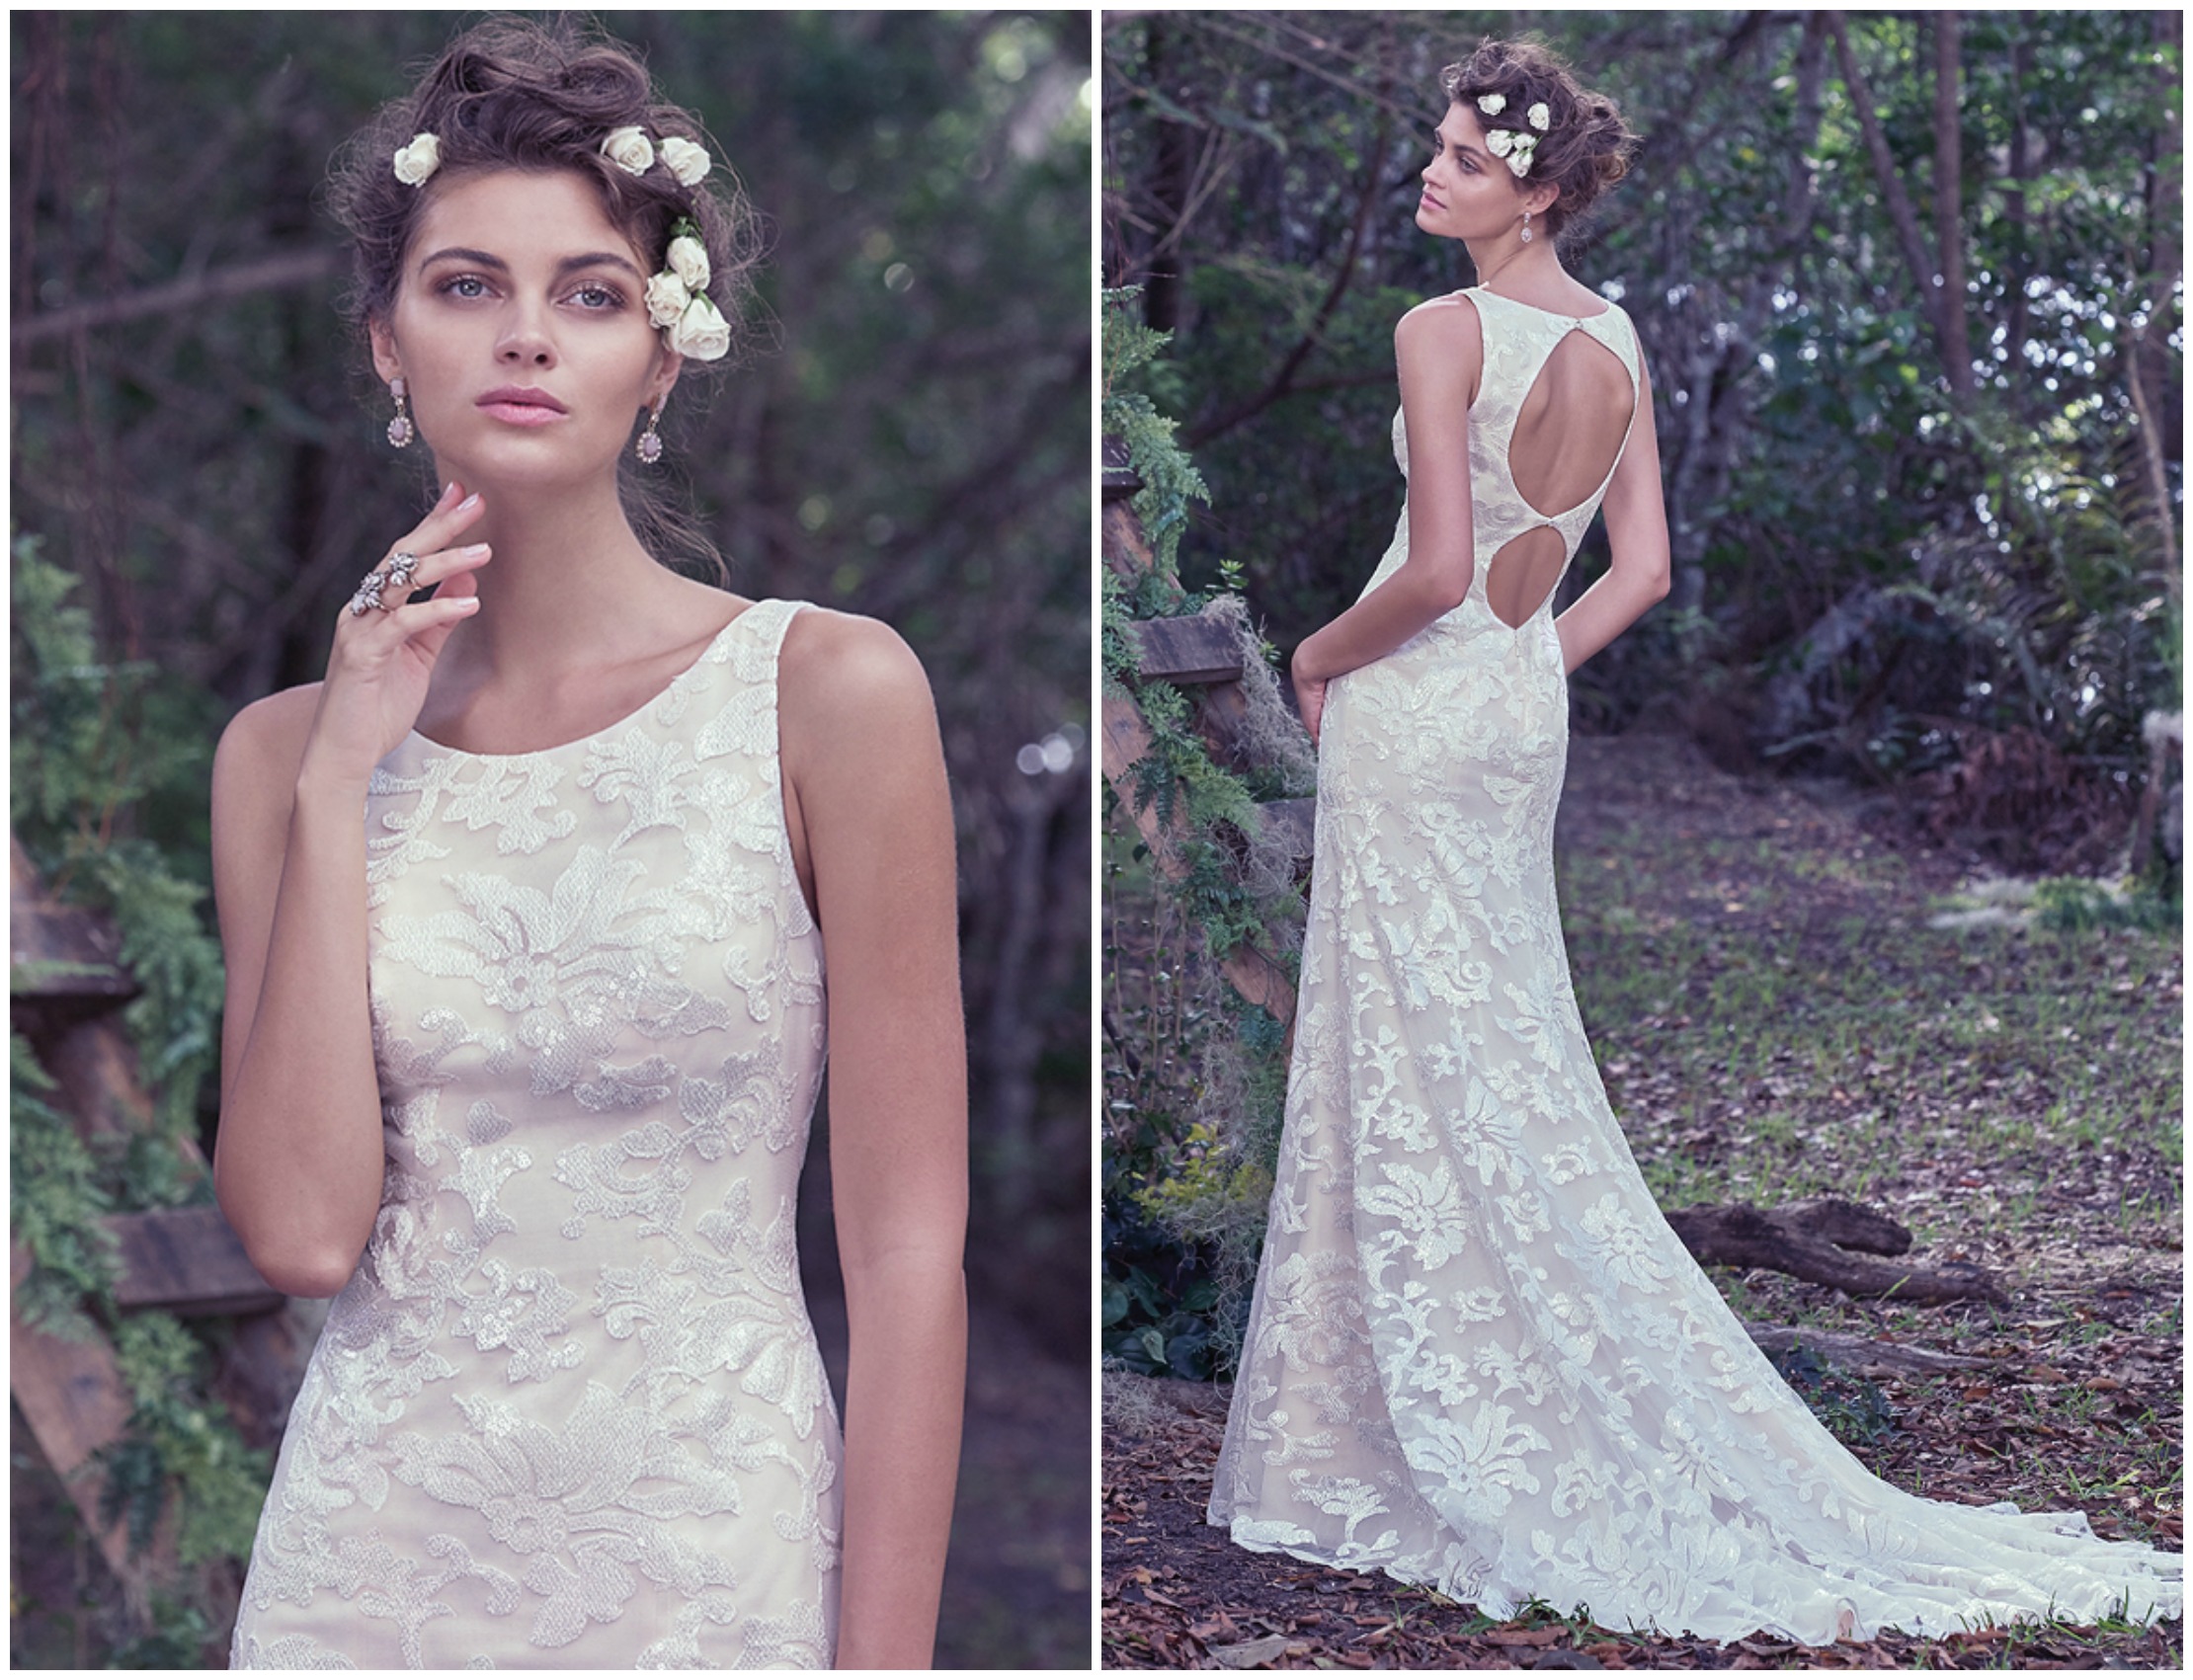 A chic scoop neckline and dramatic double keyhole back, with crystal buttons, add a fresh twist to this sheath wedding dress, embellished with embroidered, sequined floral lace. Finished with an invisible zipper. 

<a href="https://www.maggiesottero.com/maggie-sottero/rhoda/9759" target="_blank">Maggie Sottero</a>